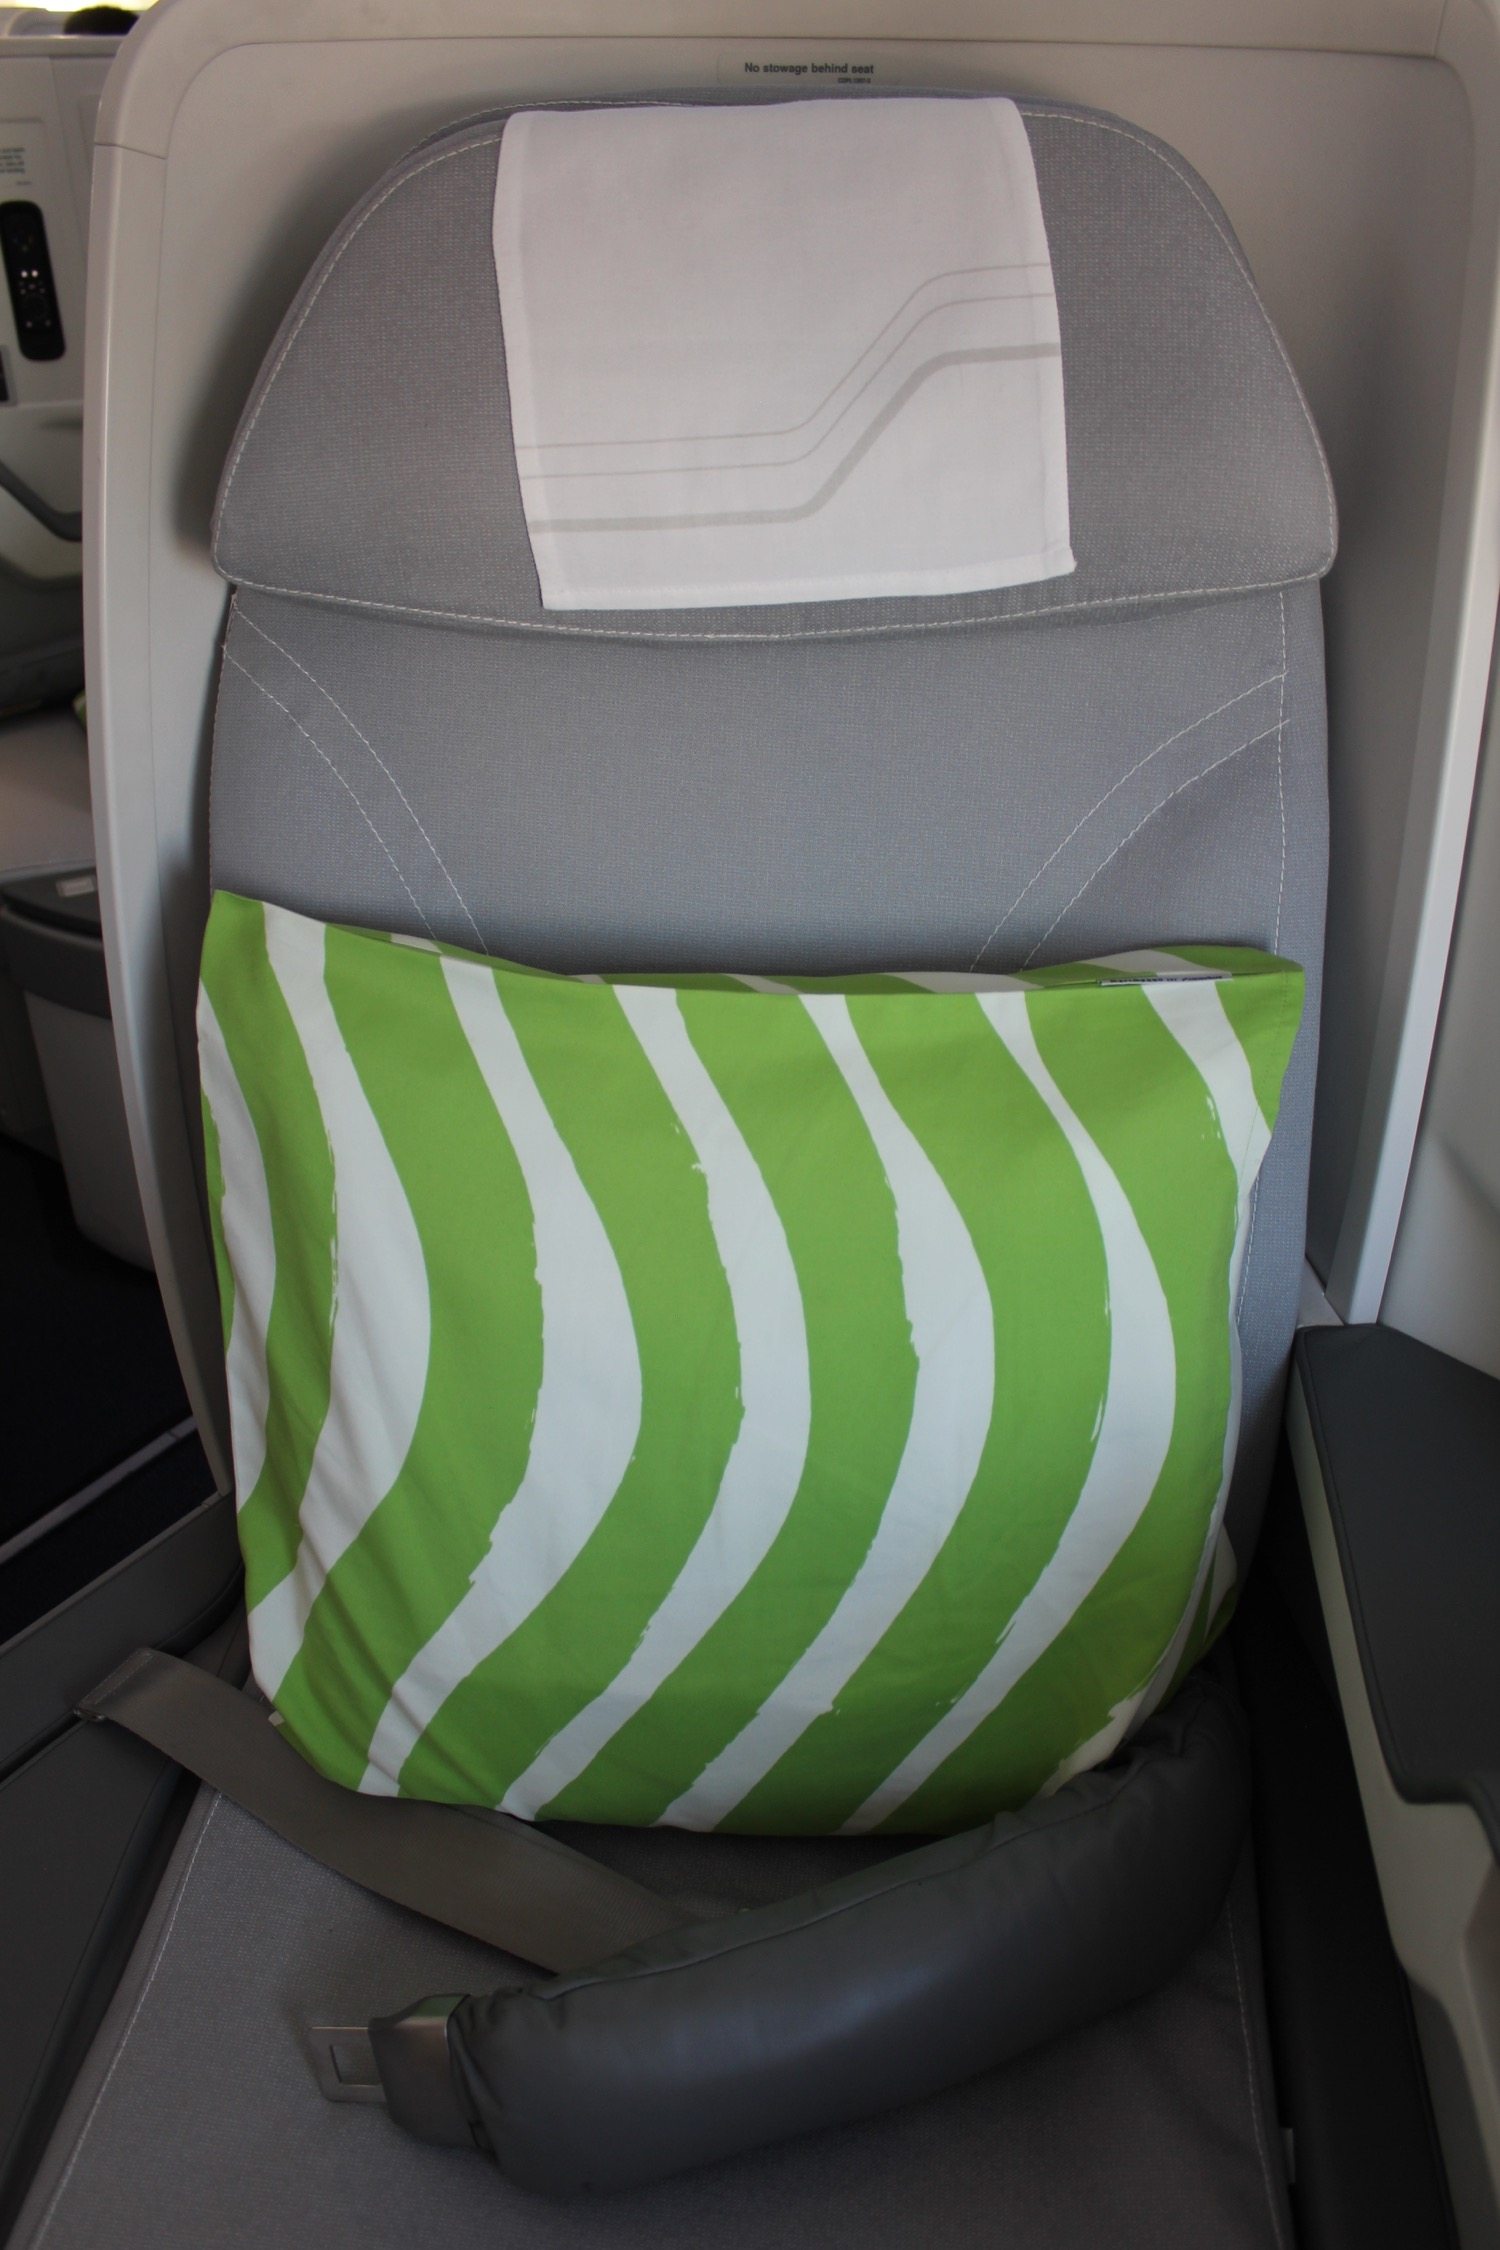 a pillow on a seat